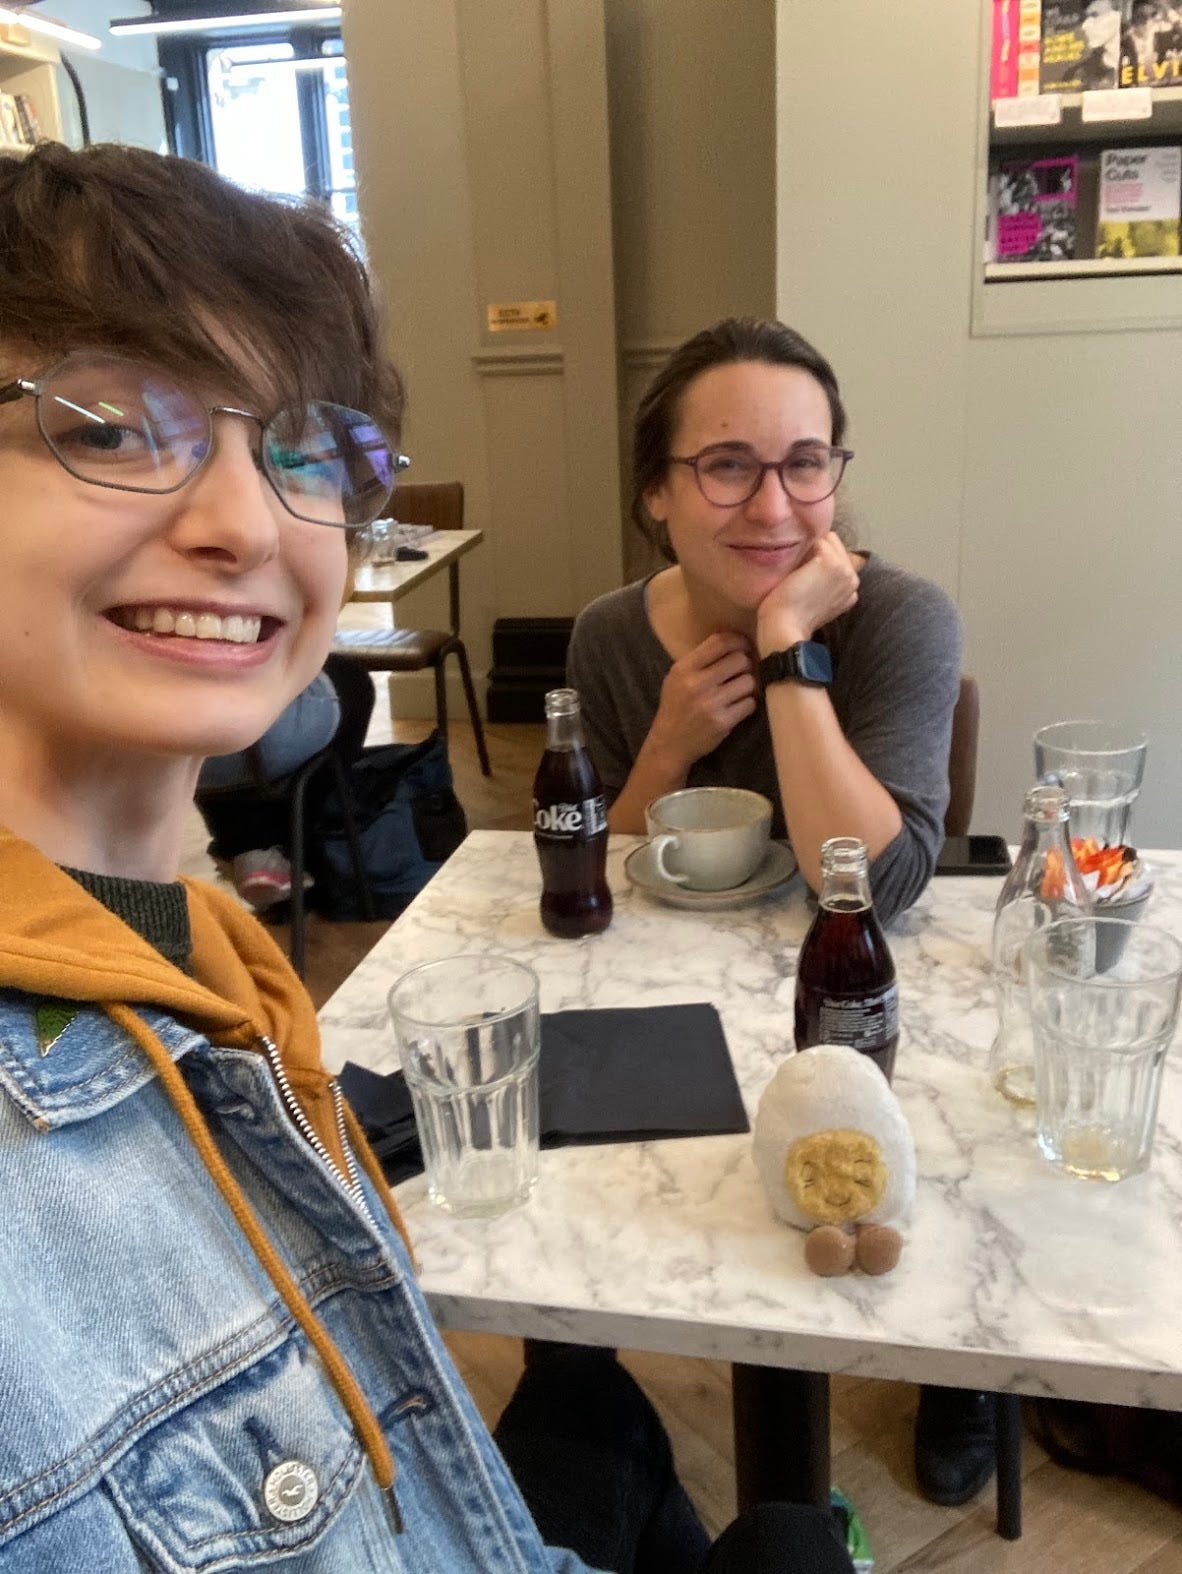 Photo of Beck and Michaela, a smiling white woman with glasses, in a cafe with a table full of empty cups and two freshly opened glass bottles of coke. Among the clutter is dippy, the soft toy egg, happy to be in the frey